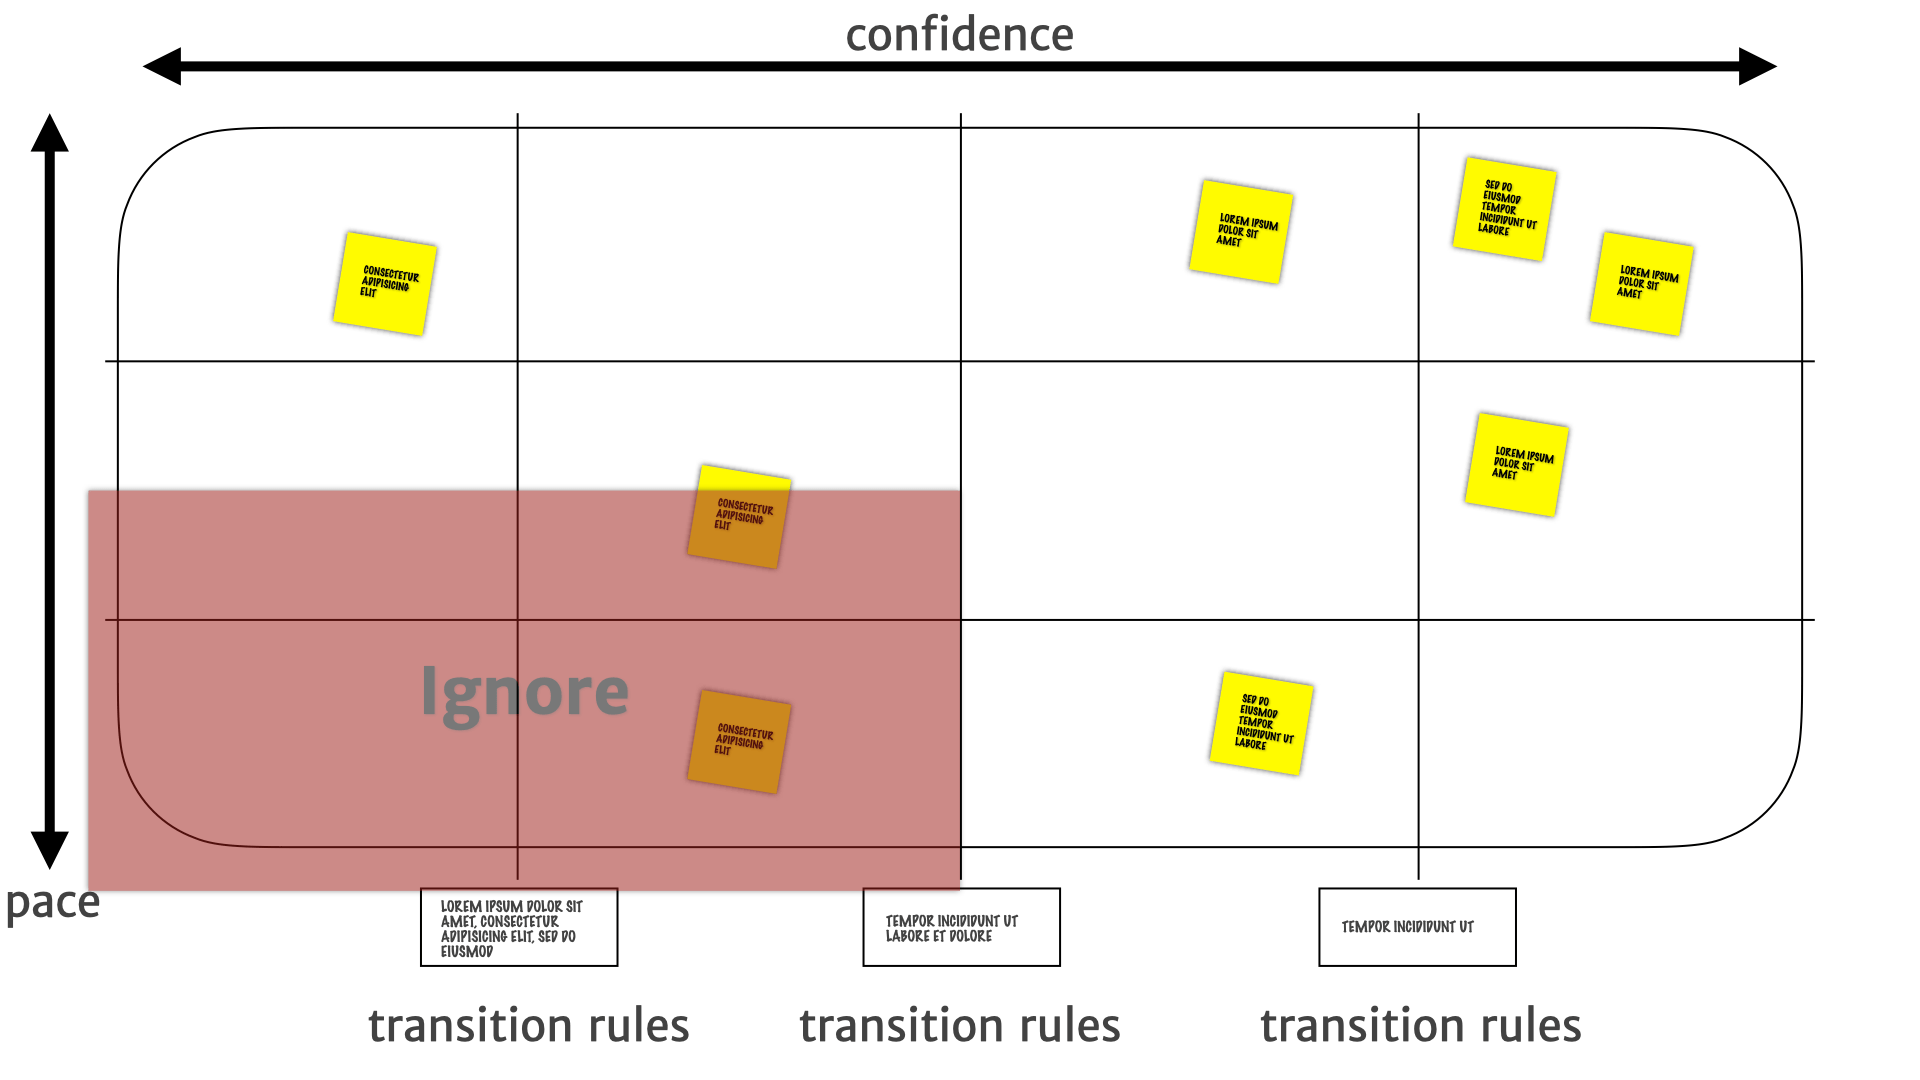 A pace layer map with the bottom-left quadrant highlighted and labelled 'ignore'.